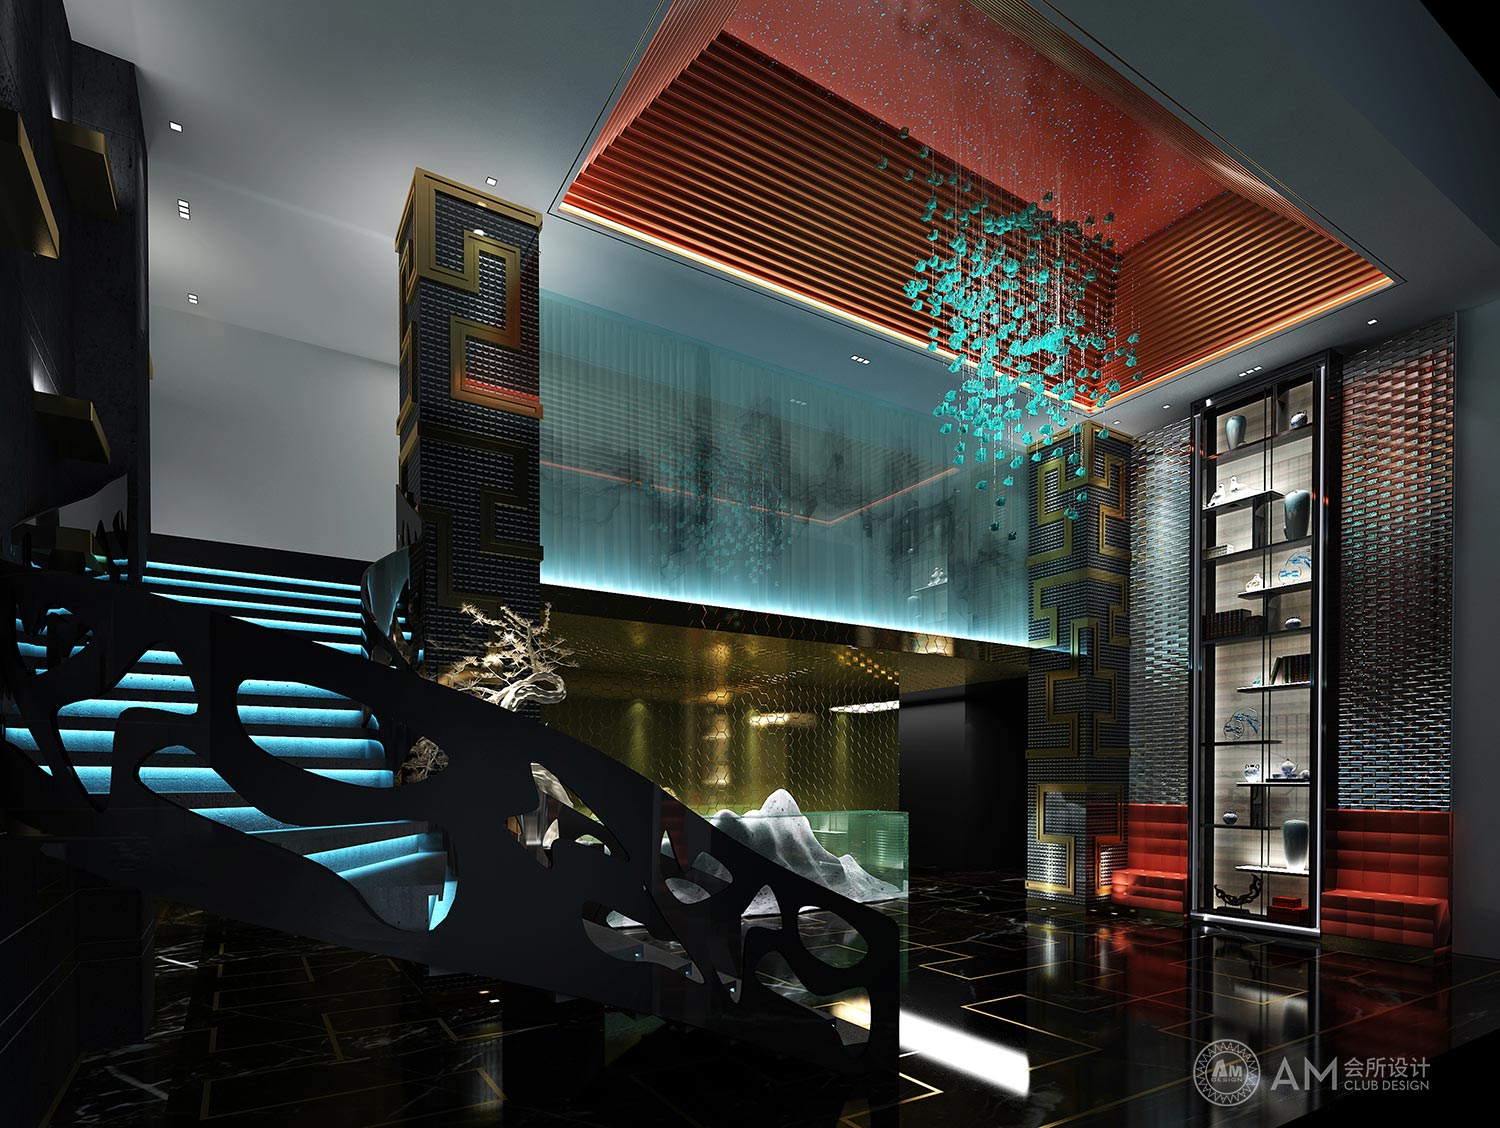 AM DESIGN | Lobby & staircase design of Top Spa Club in Joy City